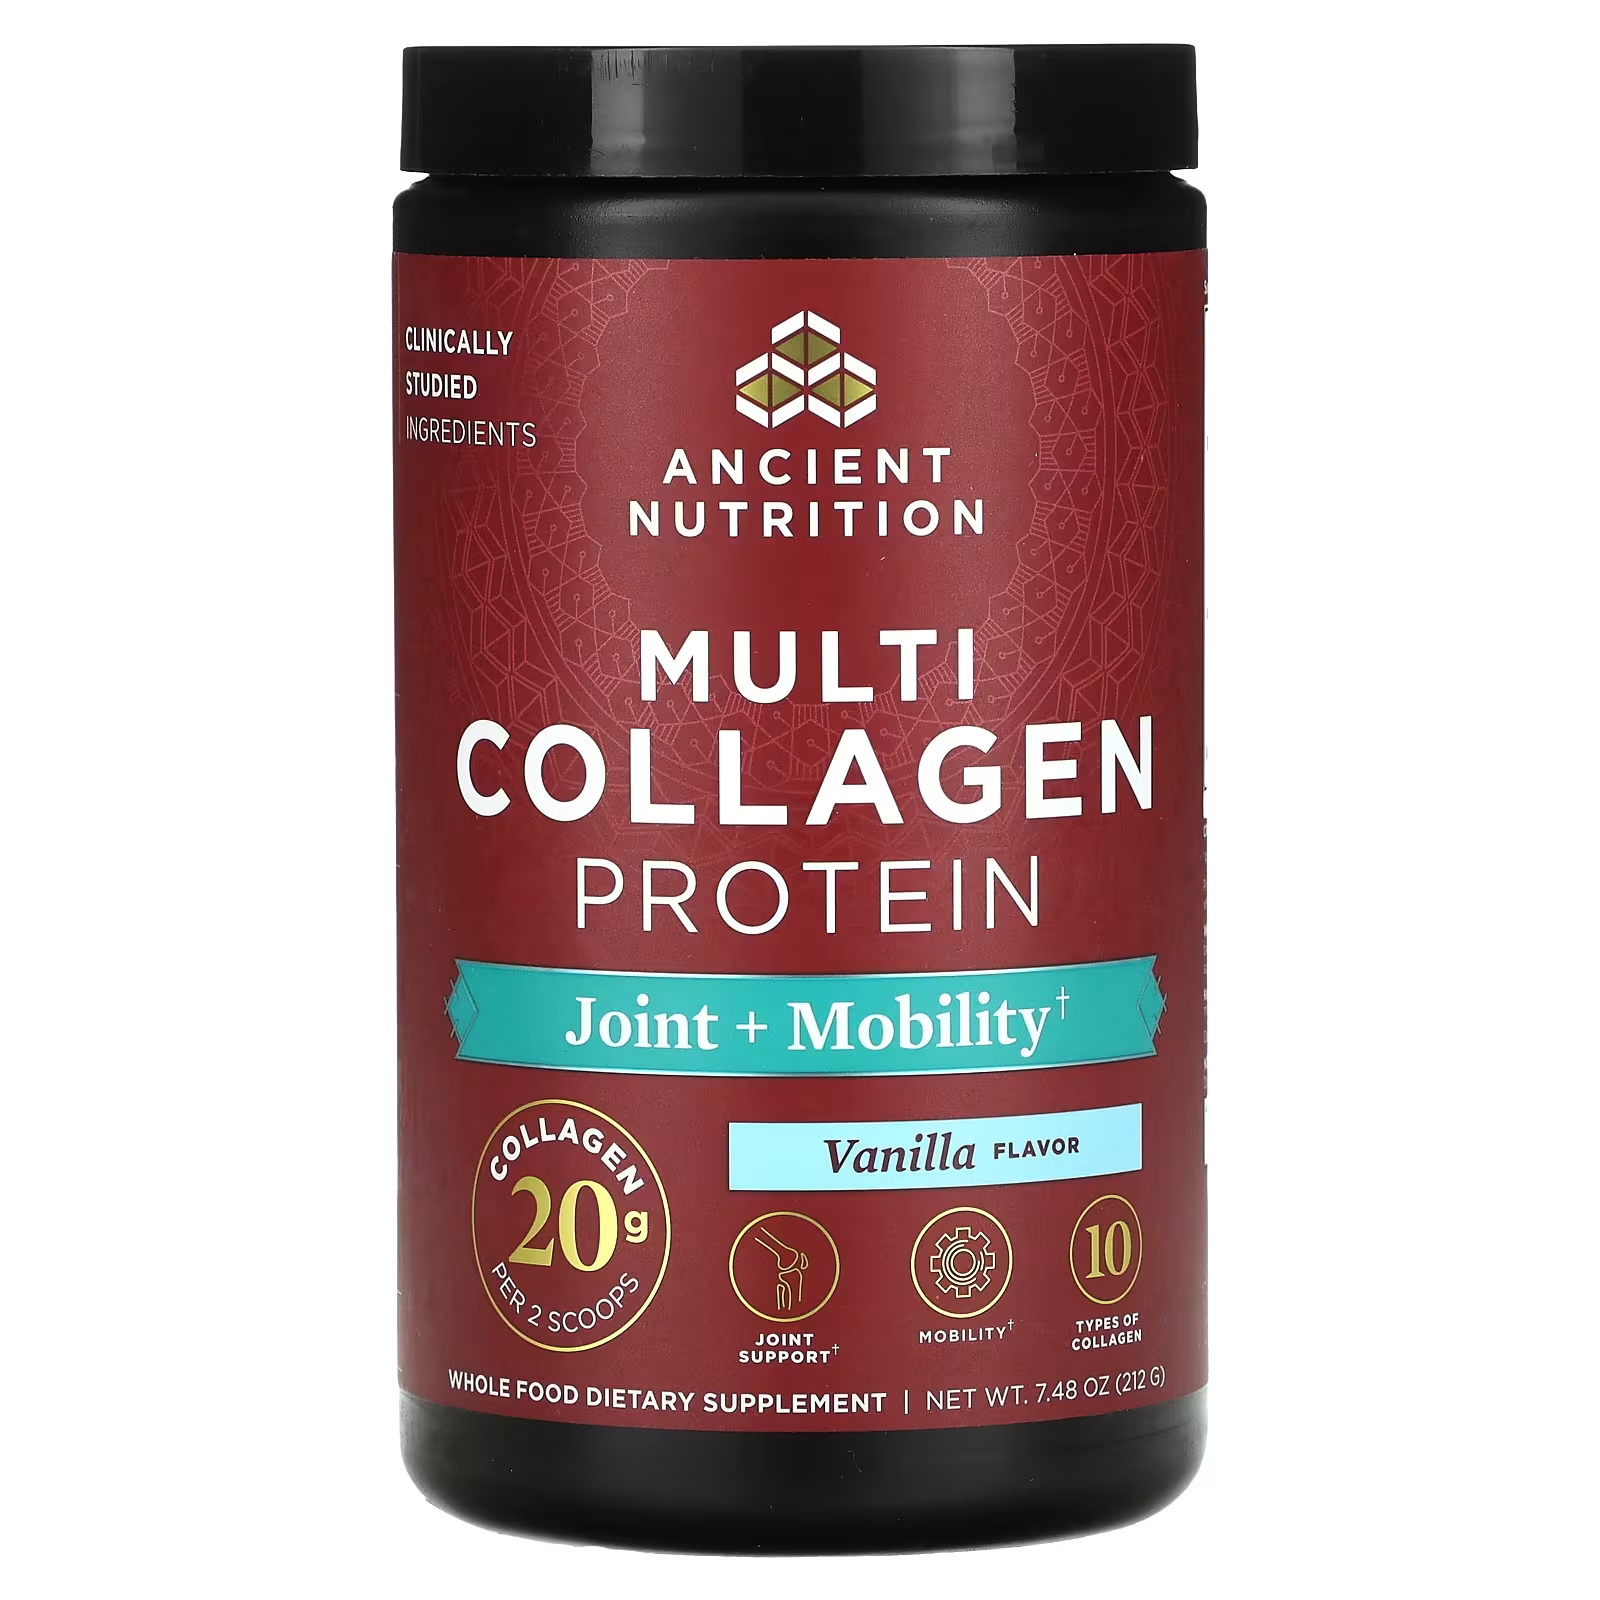 цена Пищевая добавка Ancient Nutrition Multi Collagen Protein Joint + Mobility Vanilla, 212 г